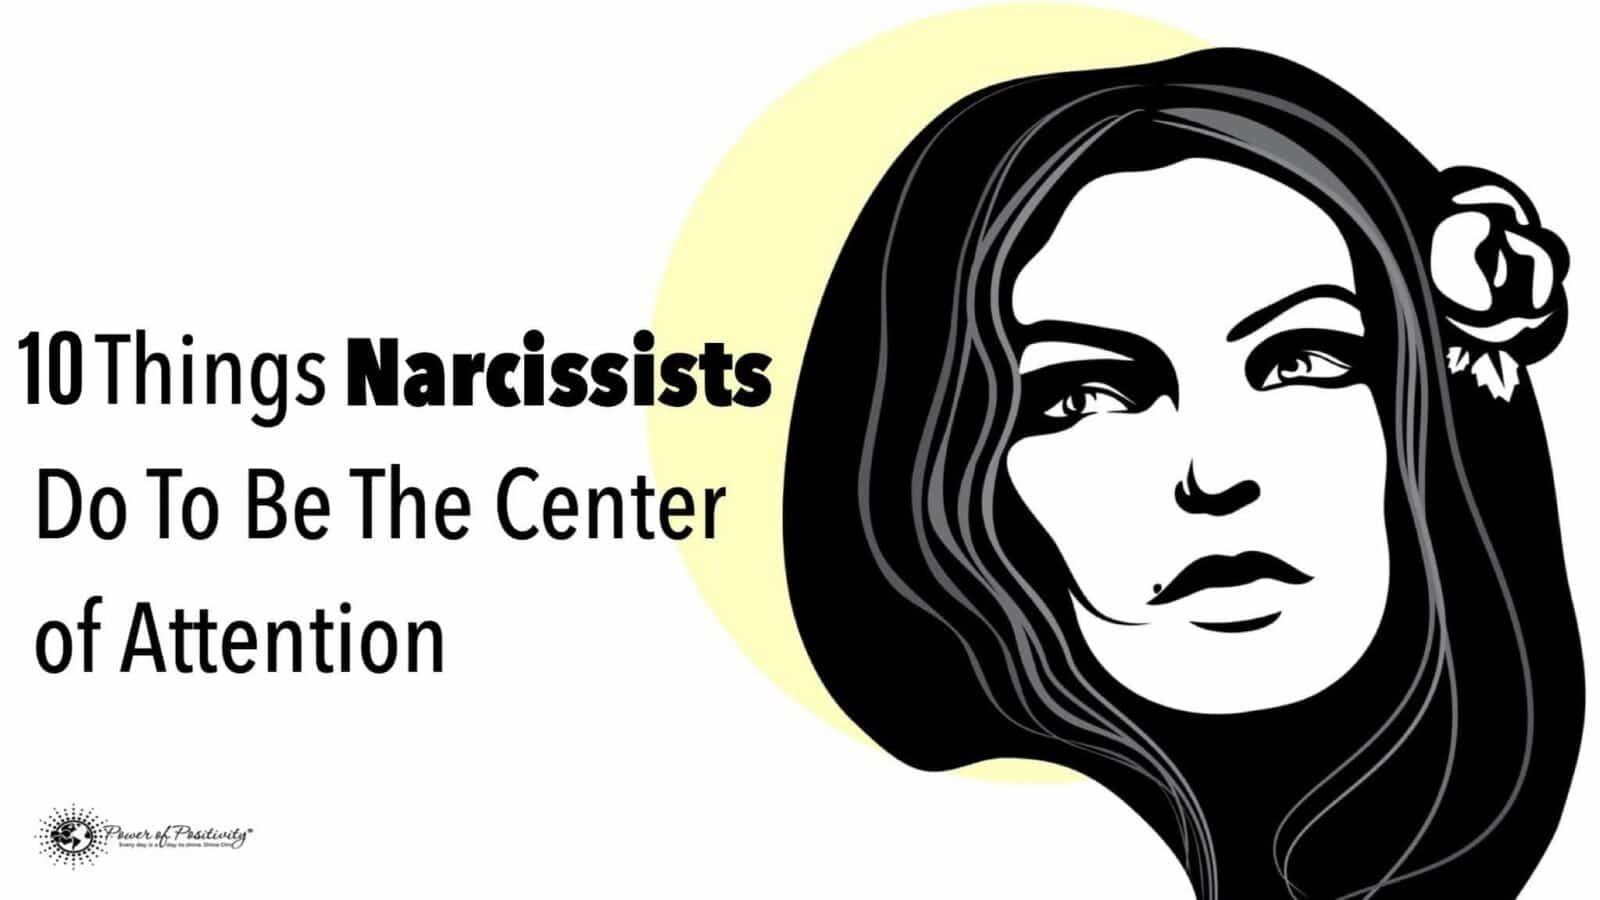 10 Things Narcissists Do To Be The Center of Attention